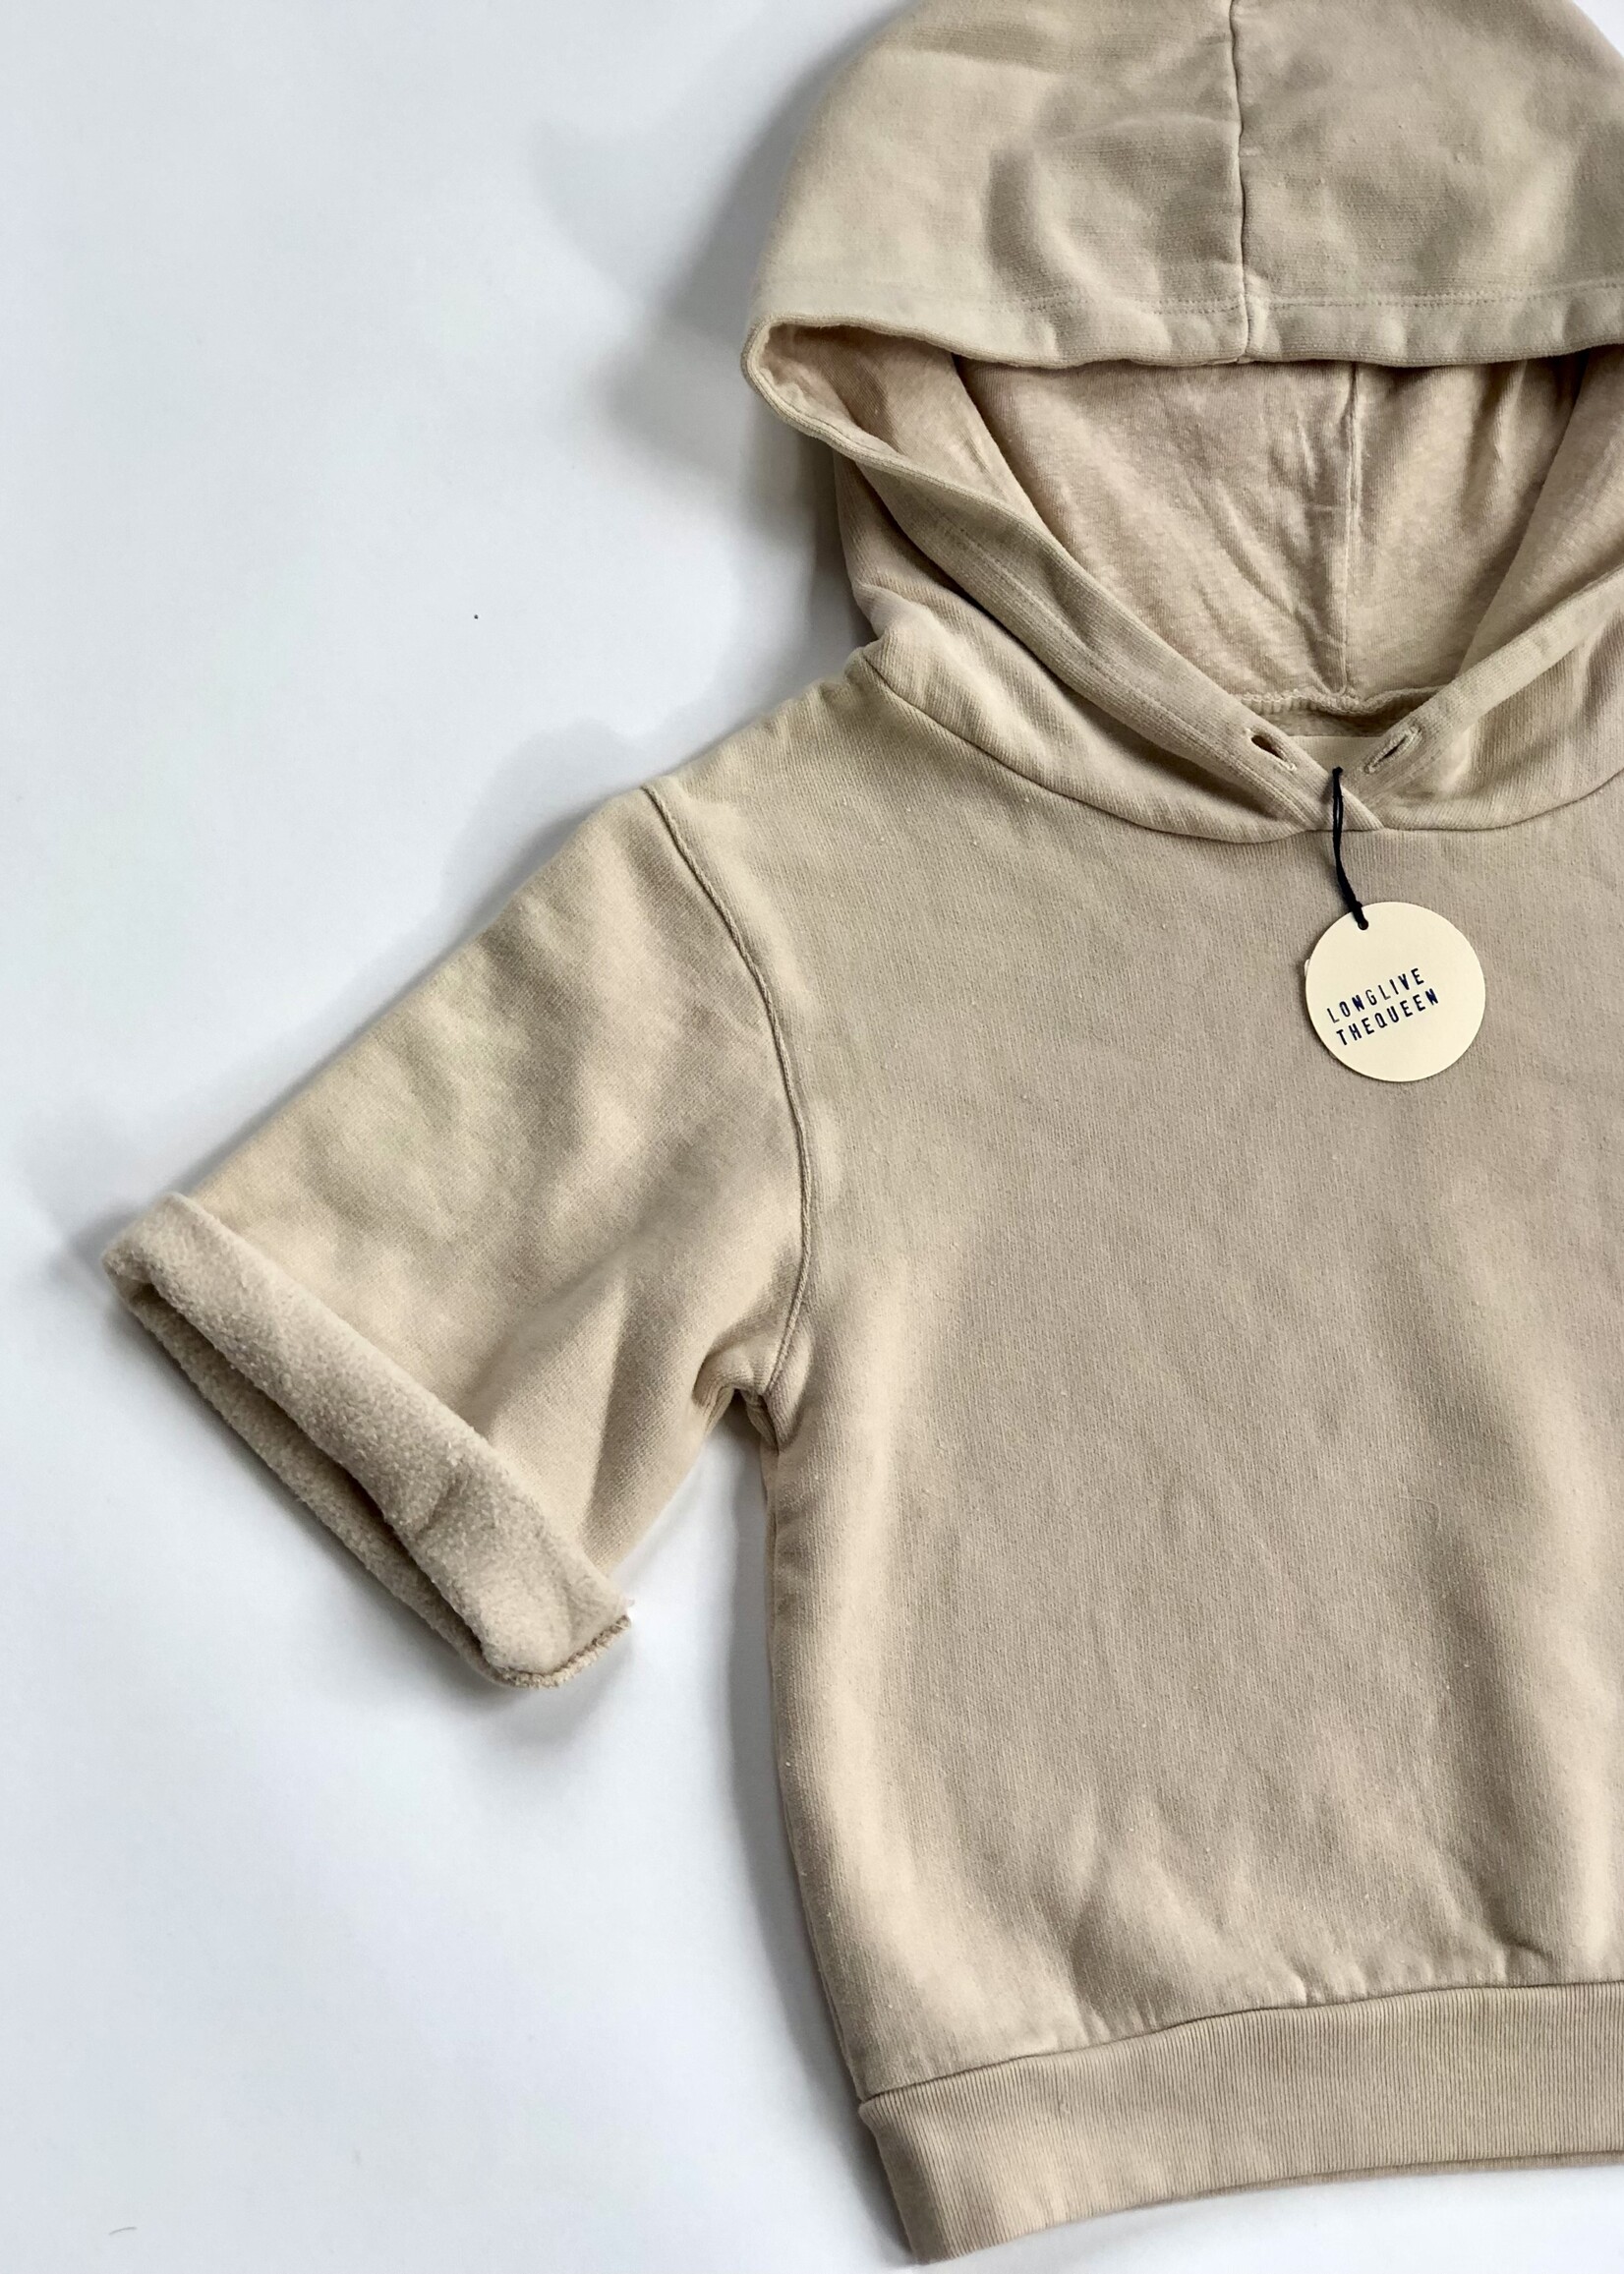 Long Live The Queen Creme hooded sweater shirt 6-8Y